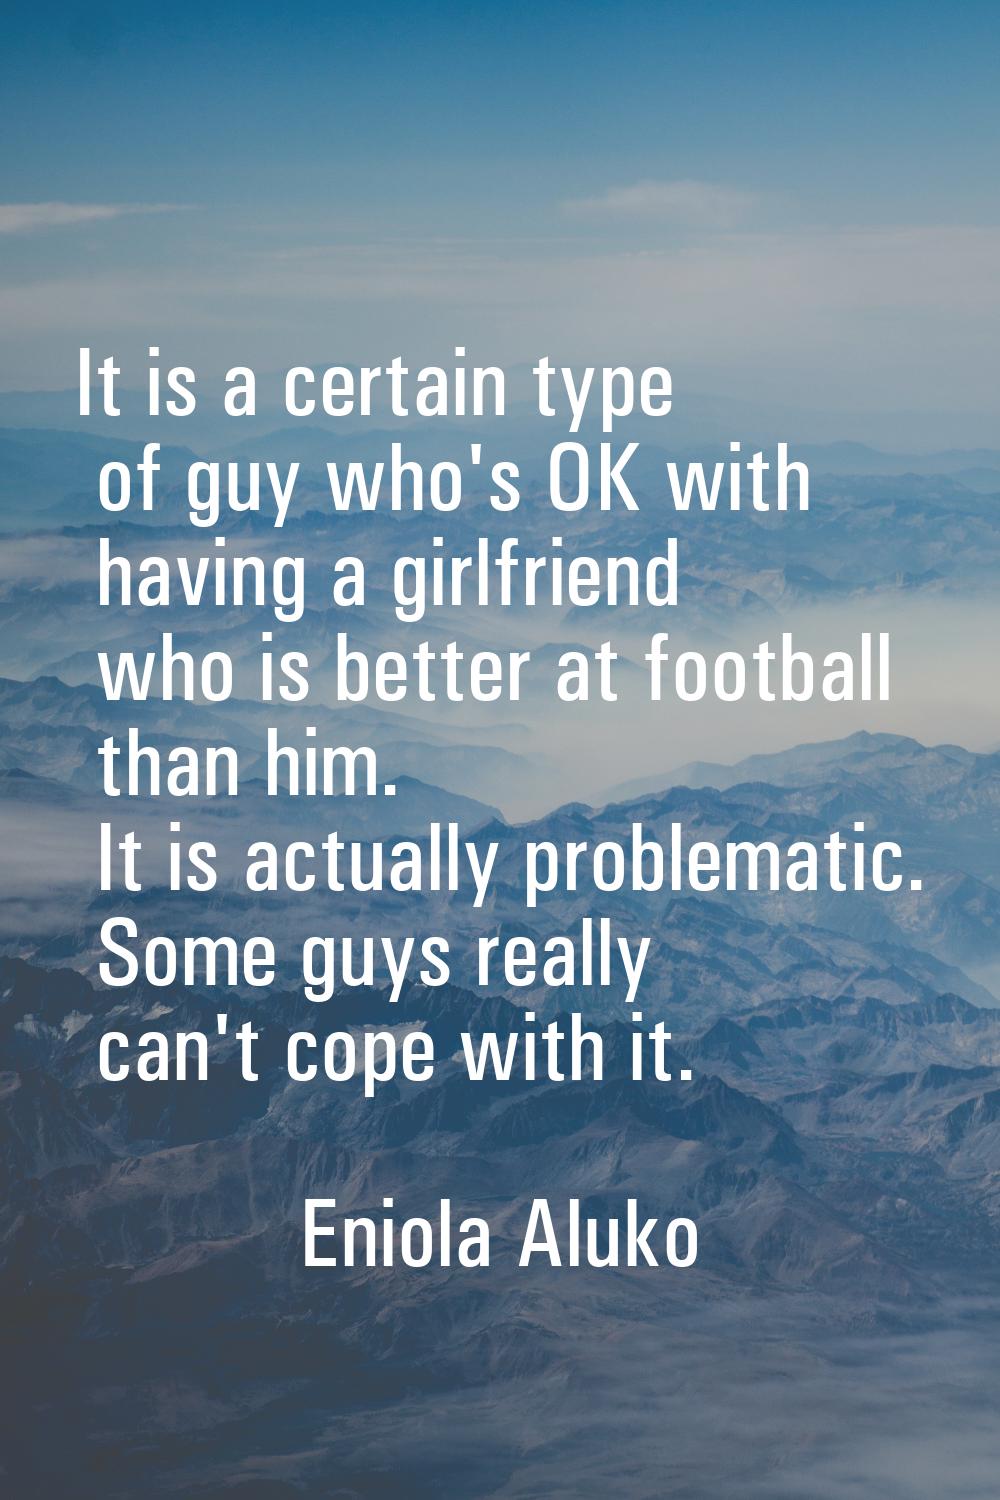 It is a certain type of guy who's OK with having a girlfriend who is better at football than him. I